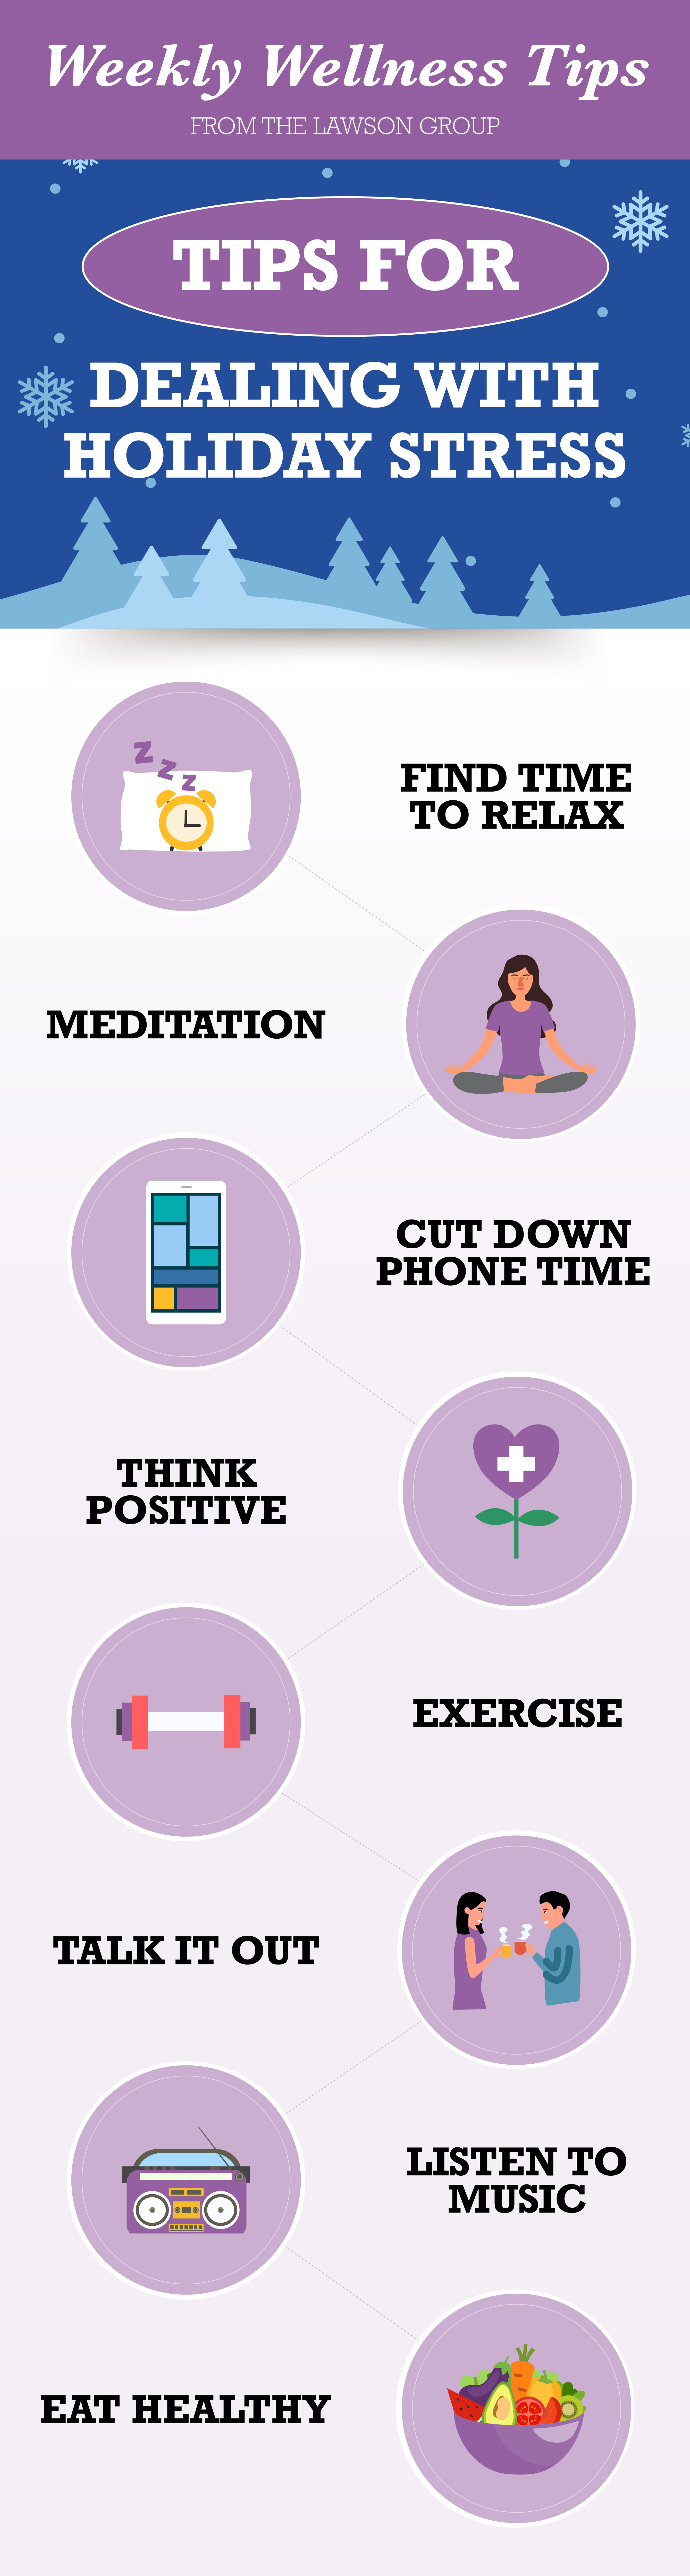 TLG22005 Wellness Tips Tips for Dealing with Holiday Stress Infographic-1080px-full